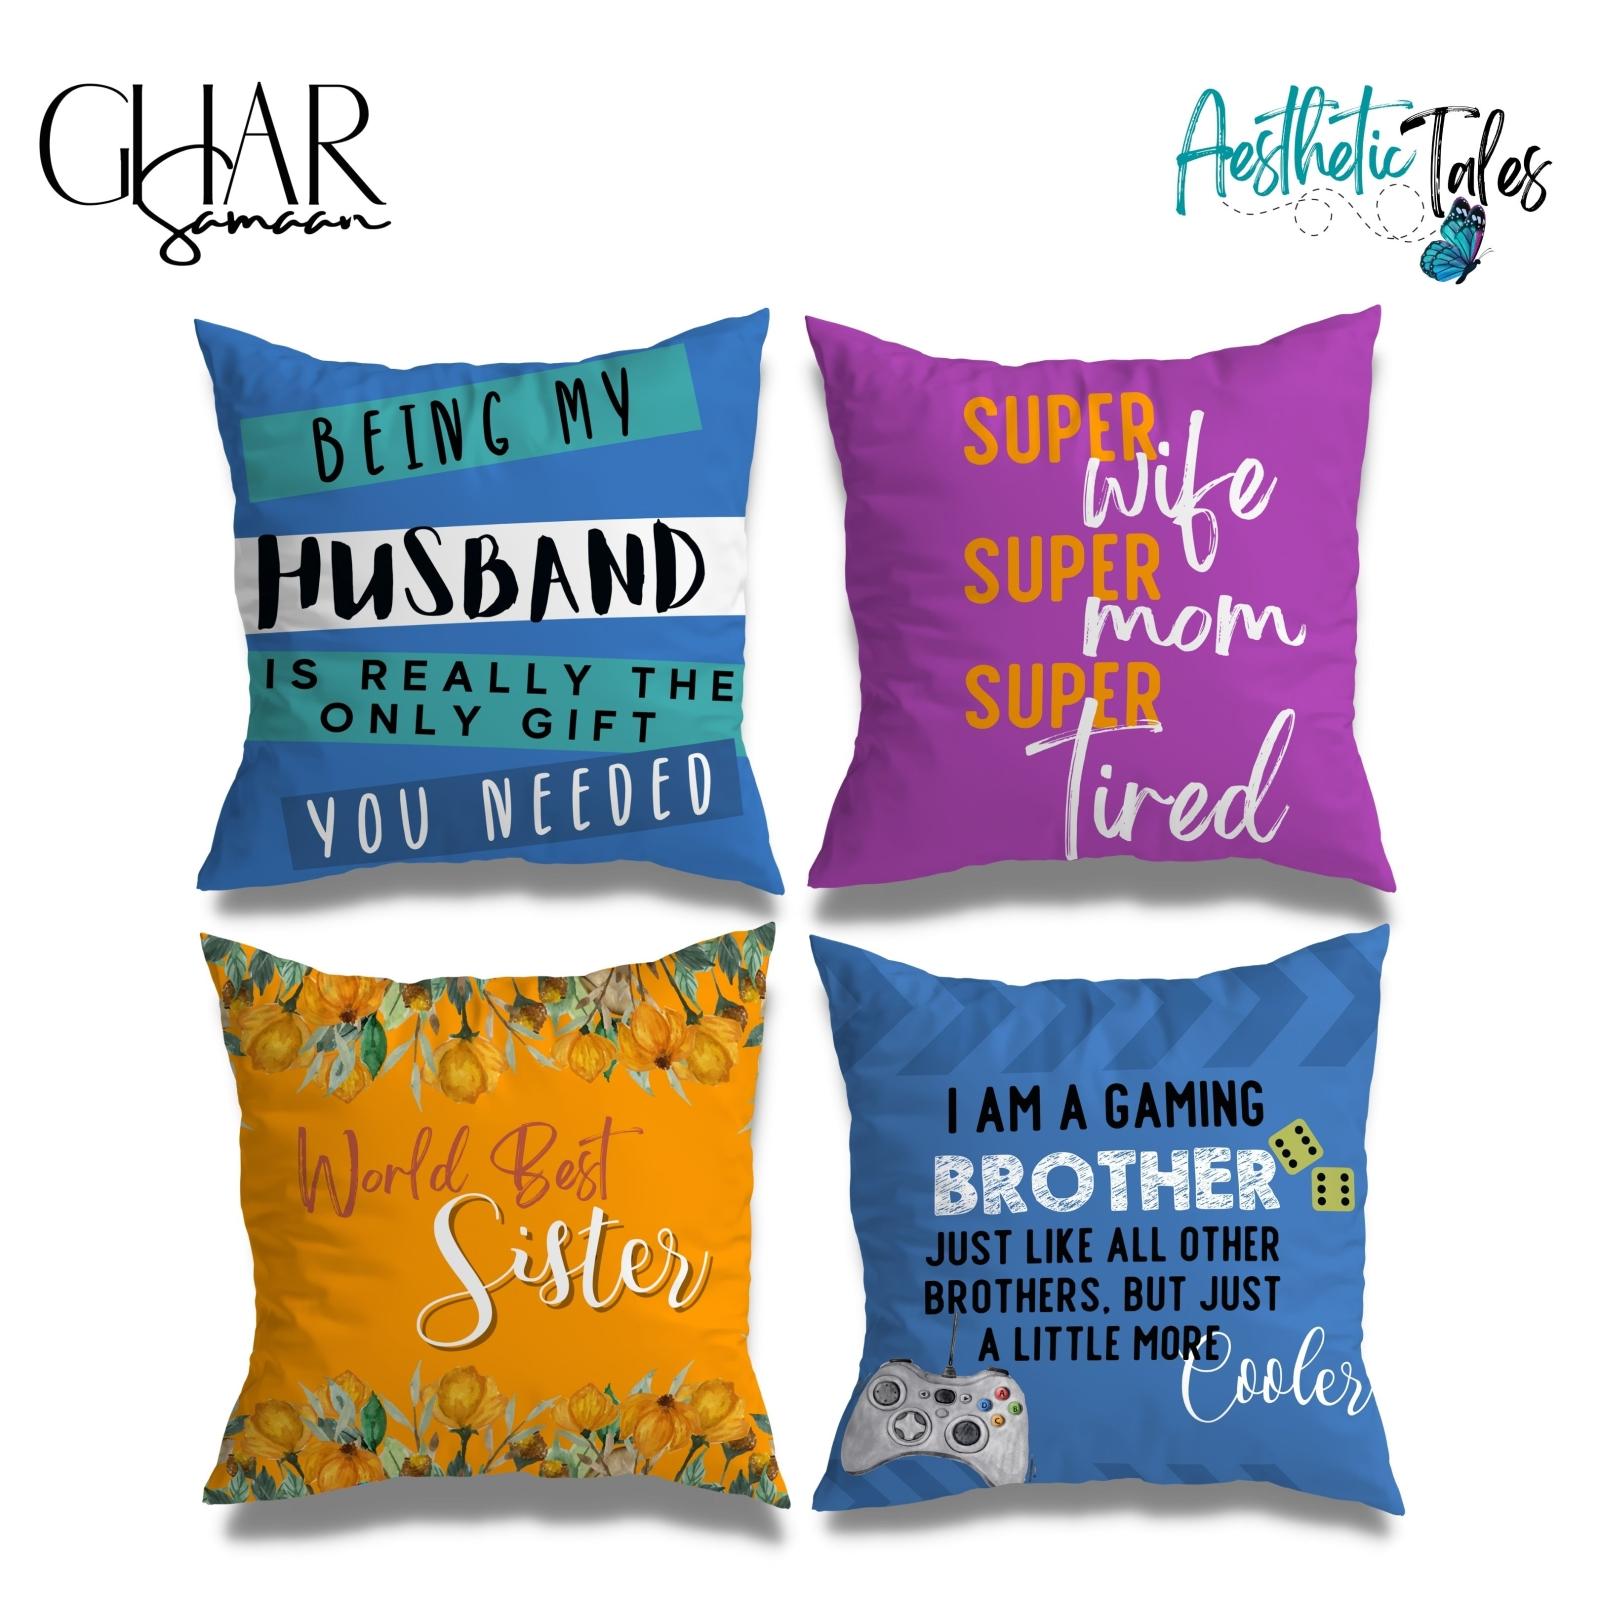 We Love Family | Cushion Covers